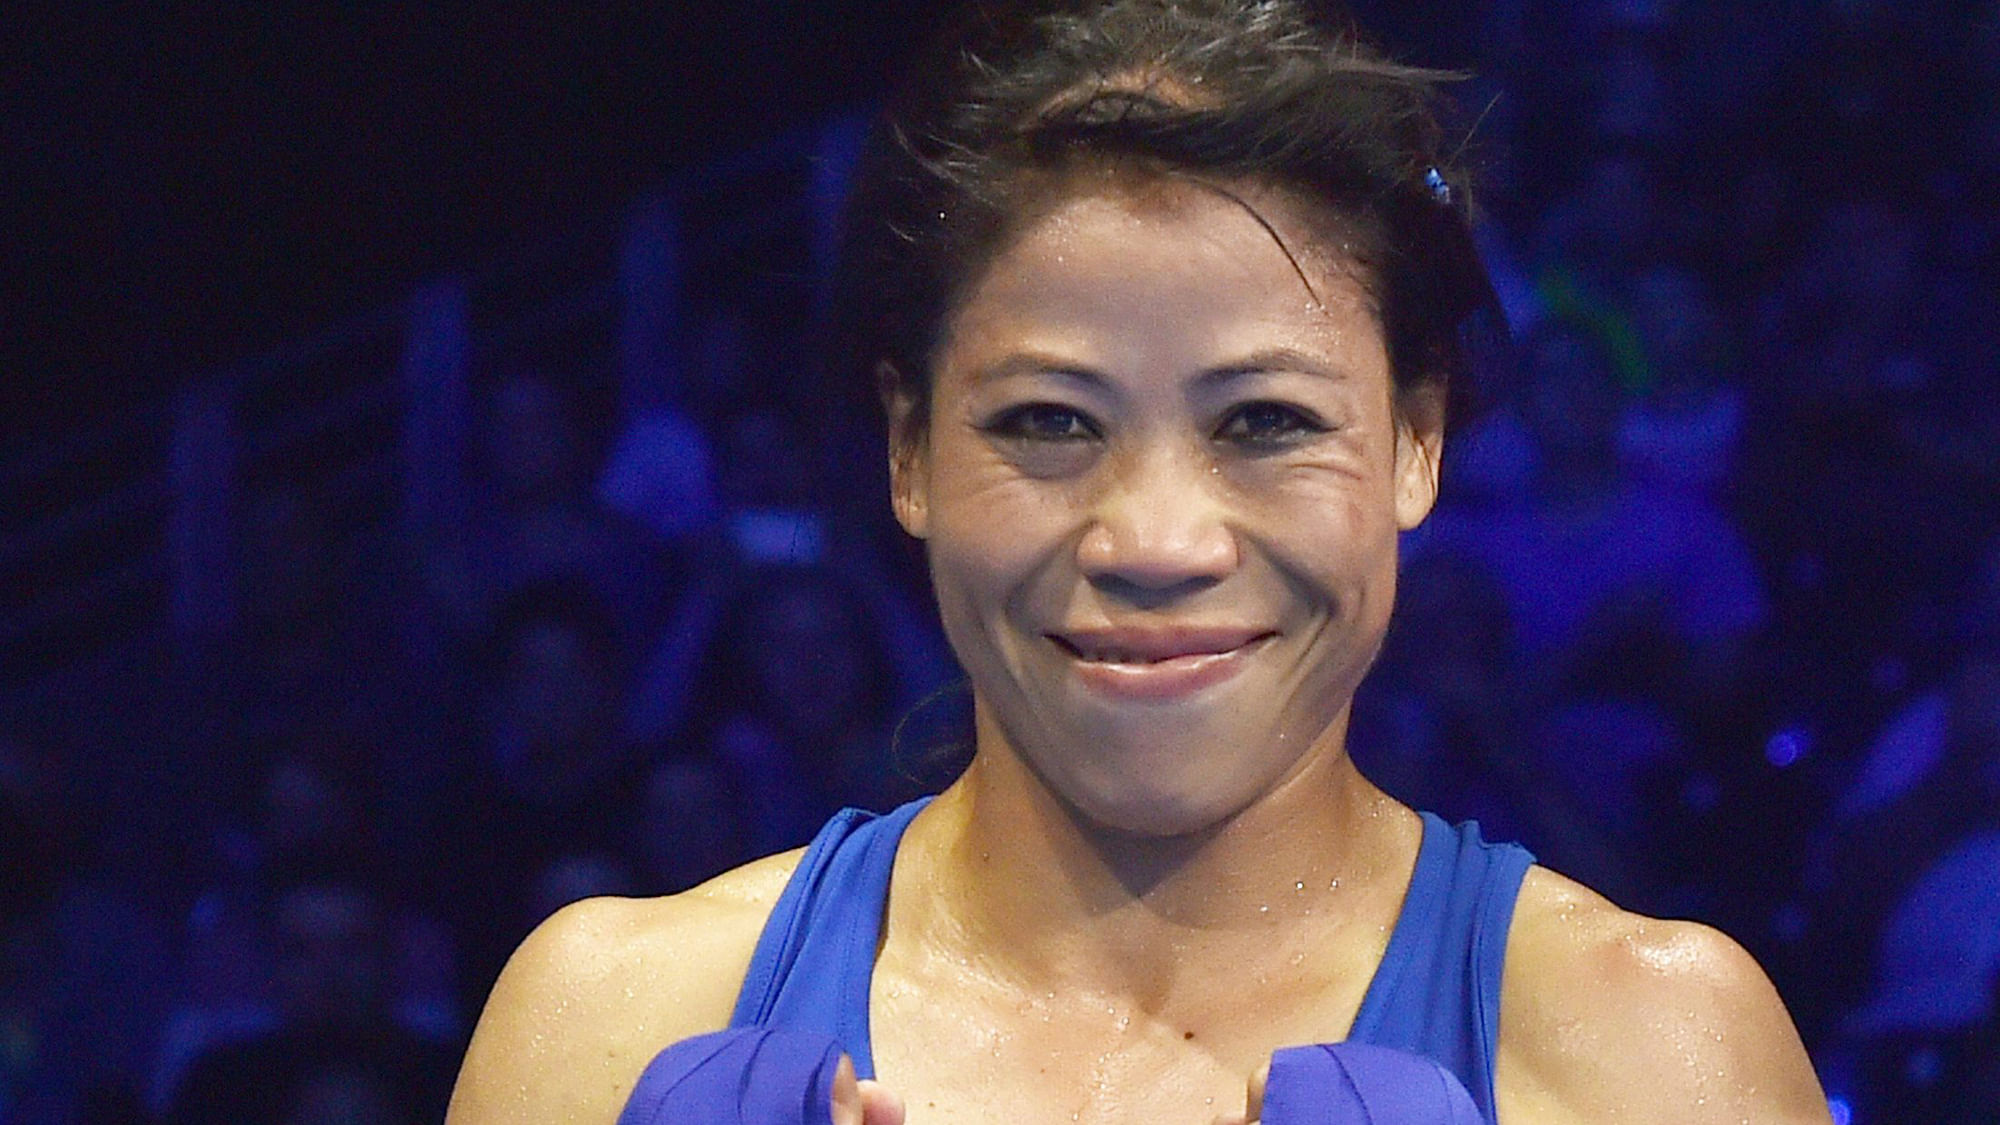 MC Mary Kom is all smiles after winning the semifinal bout at the 2018 Commonwealth Games.